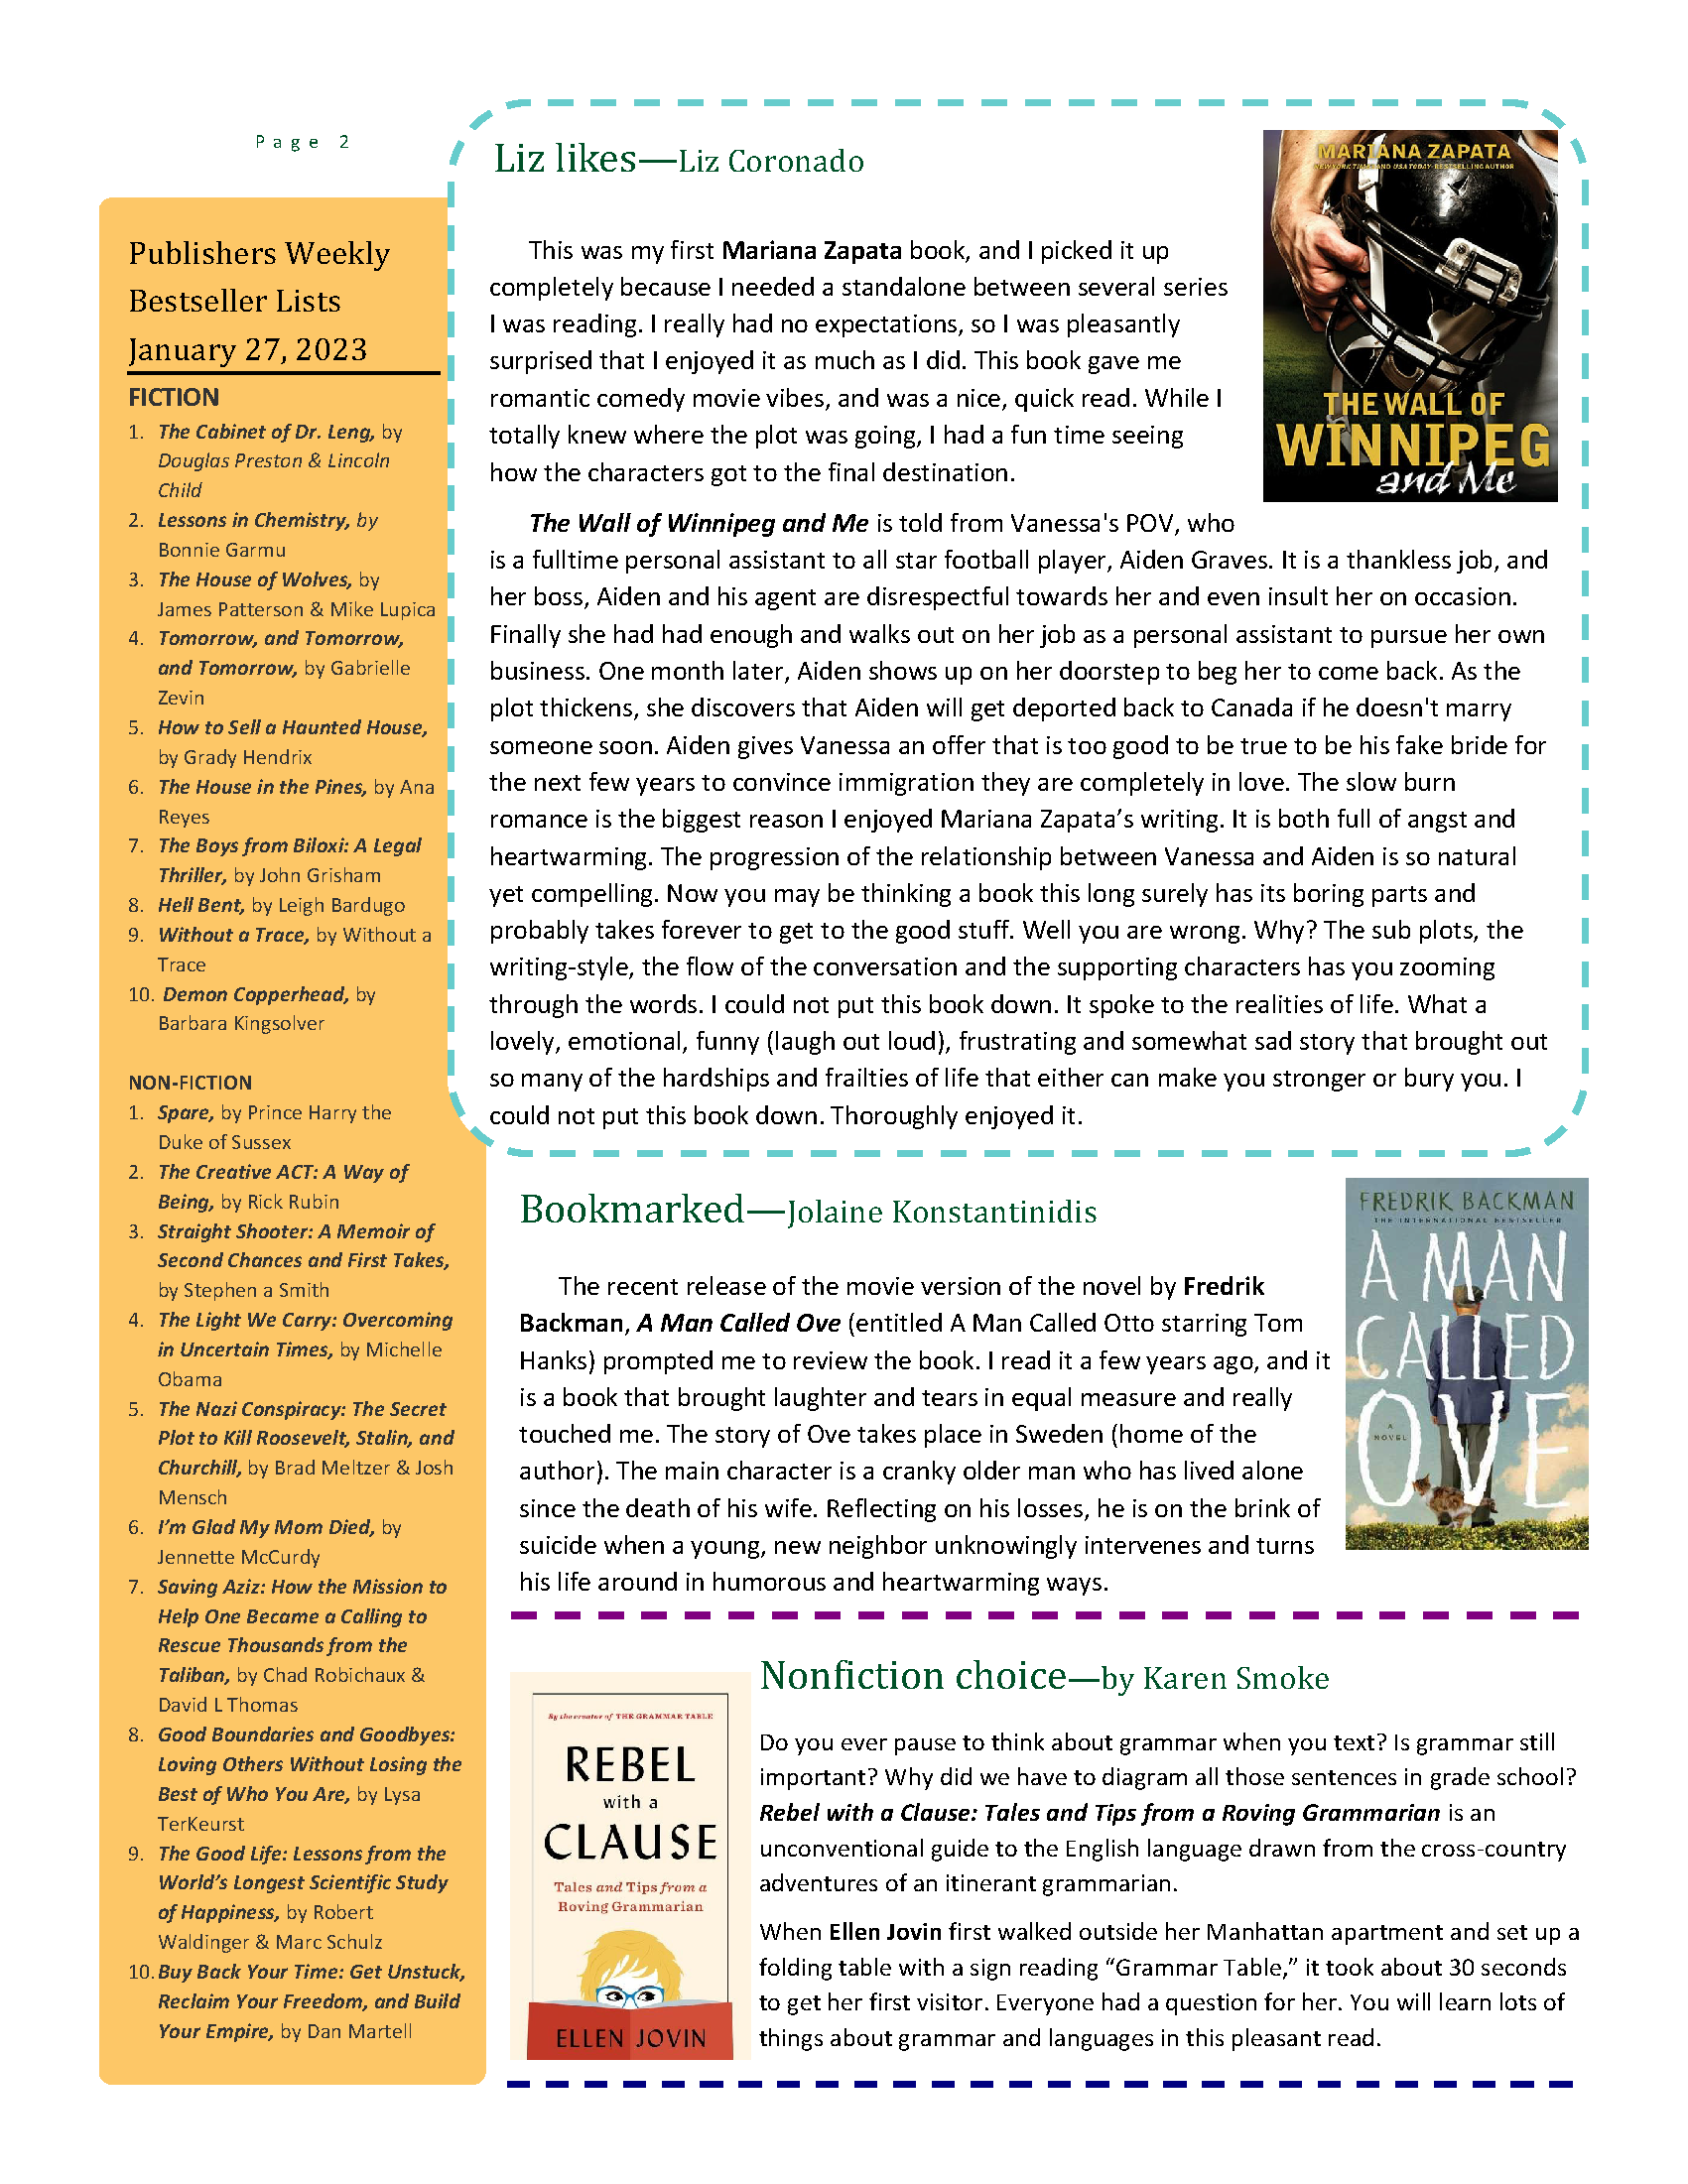 Page 2 of newsletter. PDF download available at the top of the page.